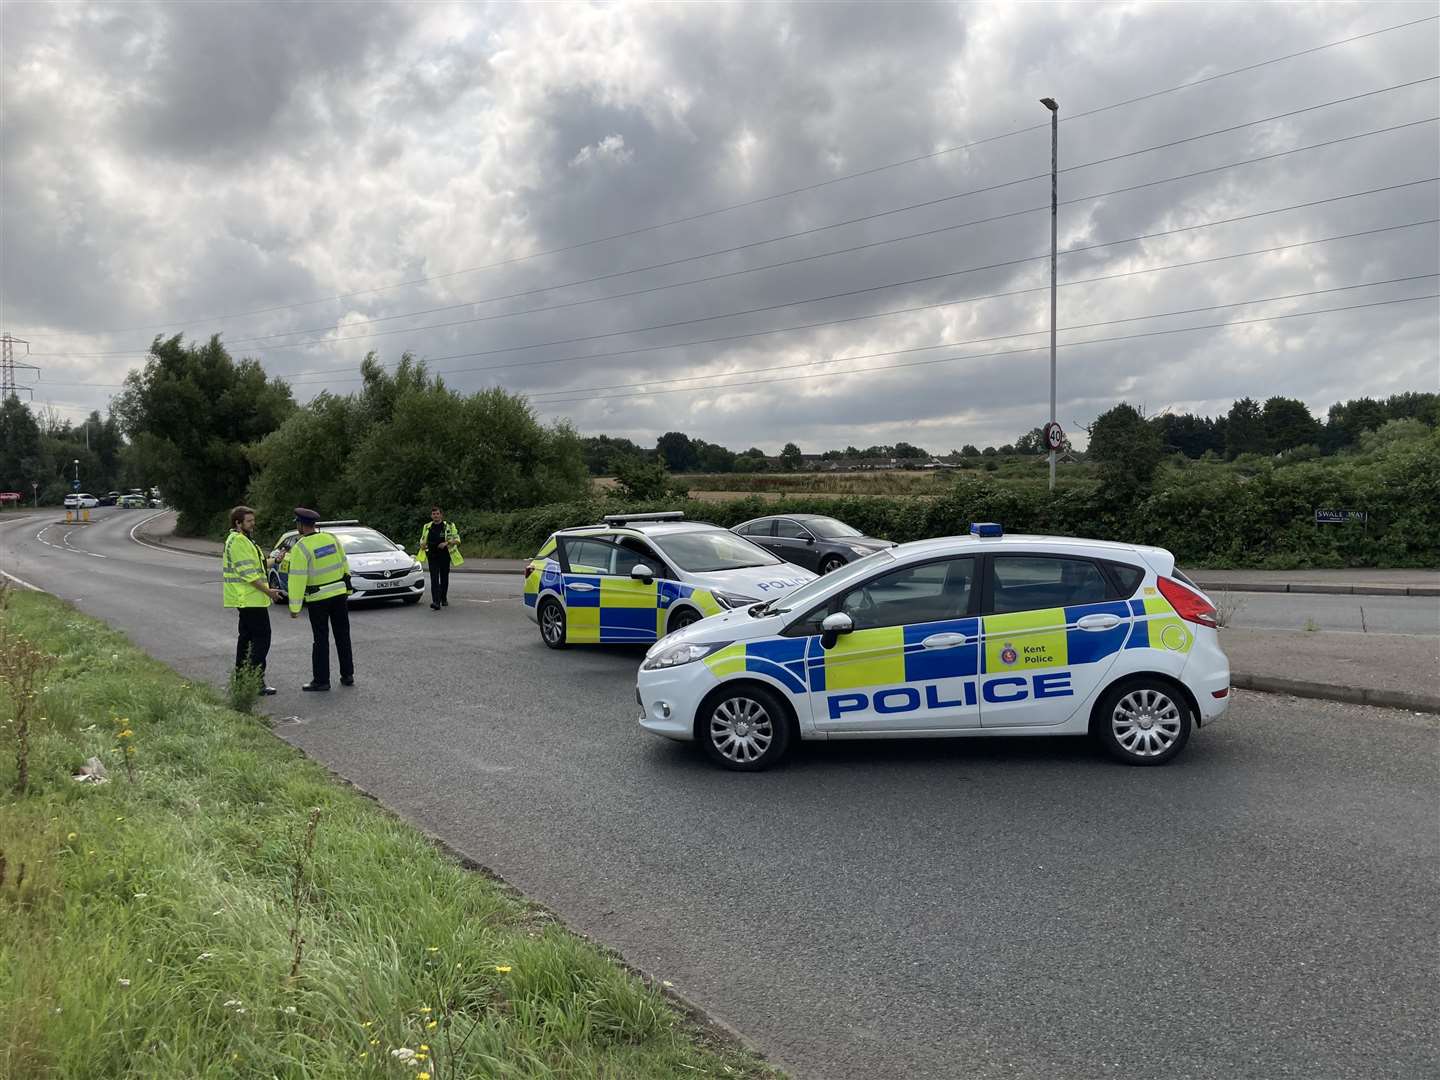 Police have closed Swale Way at the Iwade/Kemsley turn-off from the A249